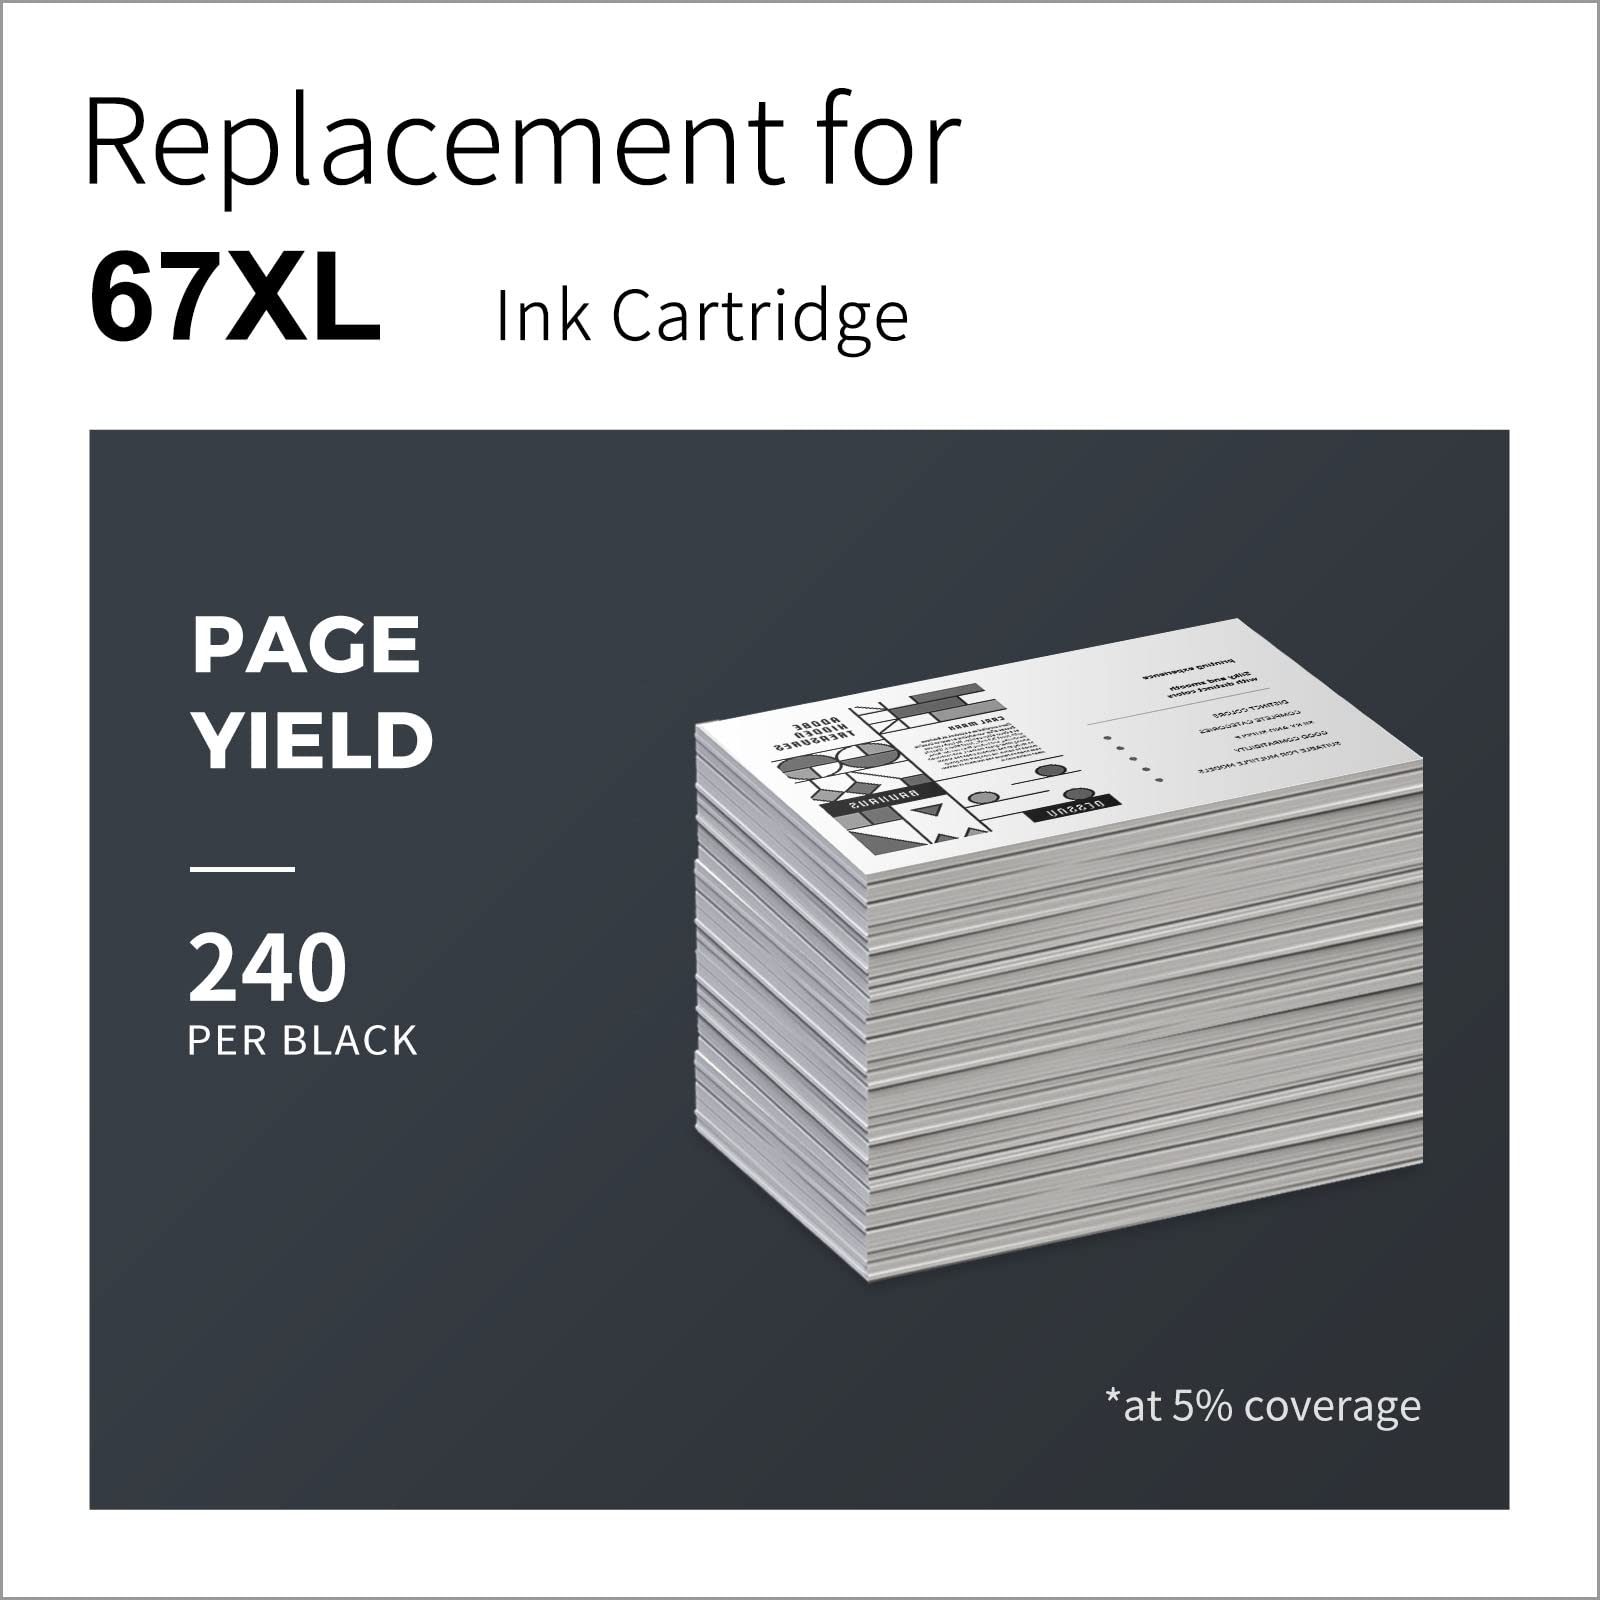 HP 67XL black ink cartridge with a page yield of 240 sheets displayed beside a stack of printed pages - high-quality printing assured.